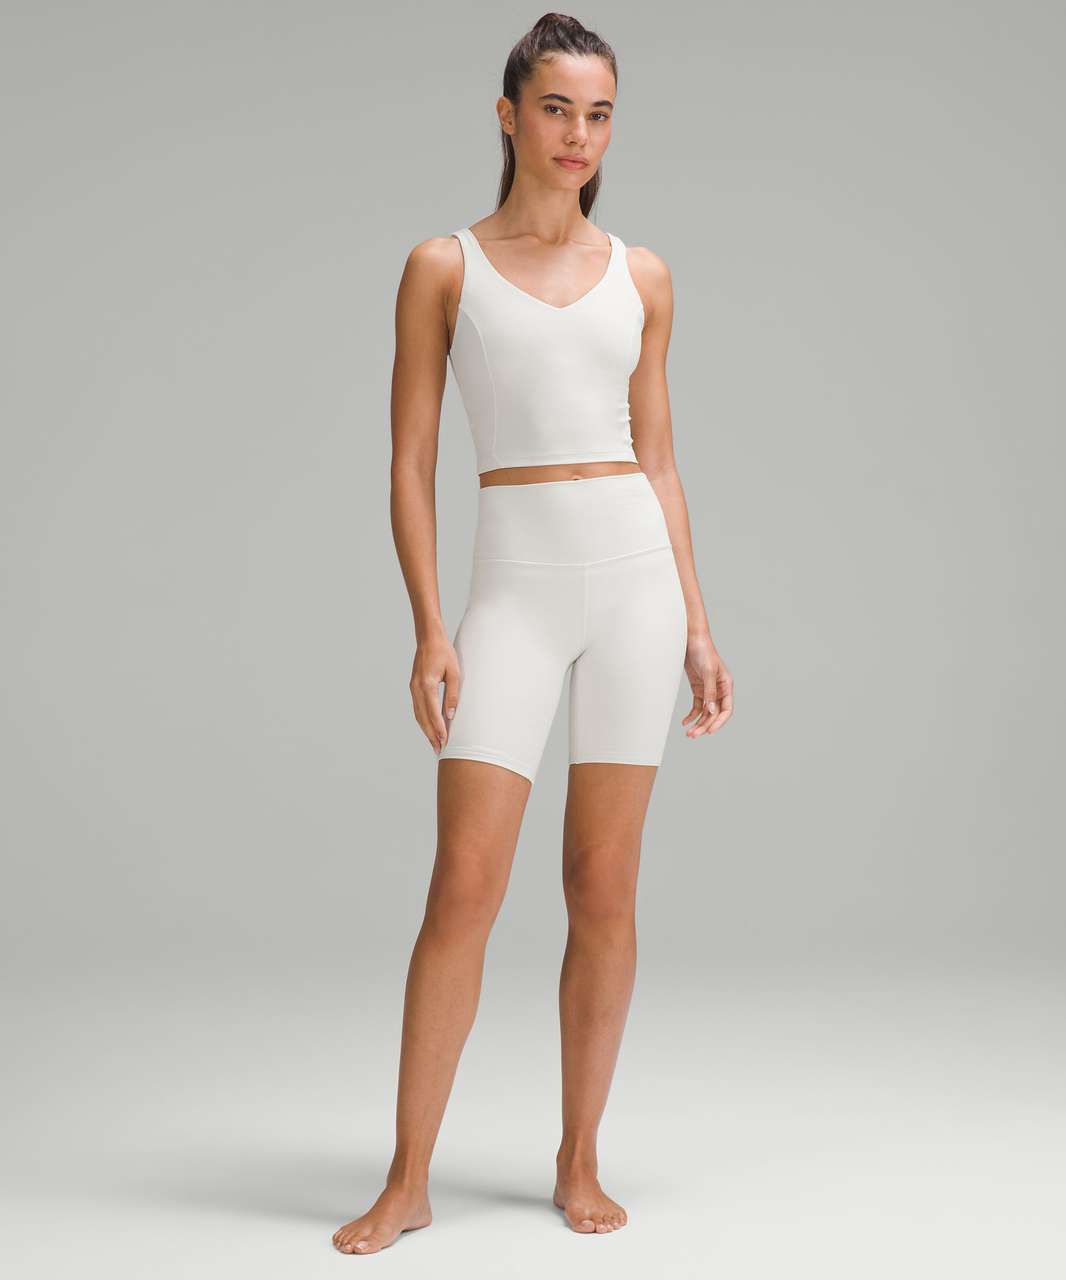 White Align Tank (8) and Light Chrome Align Legging (6); Align Tank sizing  for 30DDD and Double Lined thoughts in the comments! : r/lululemon